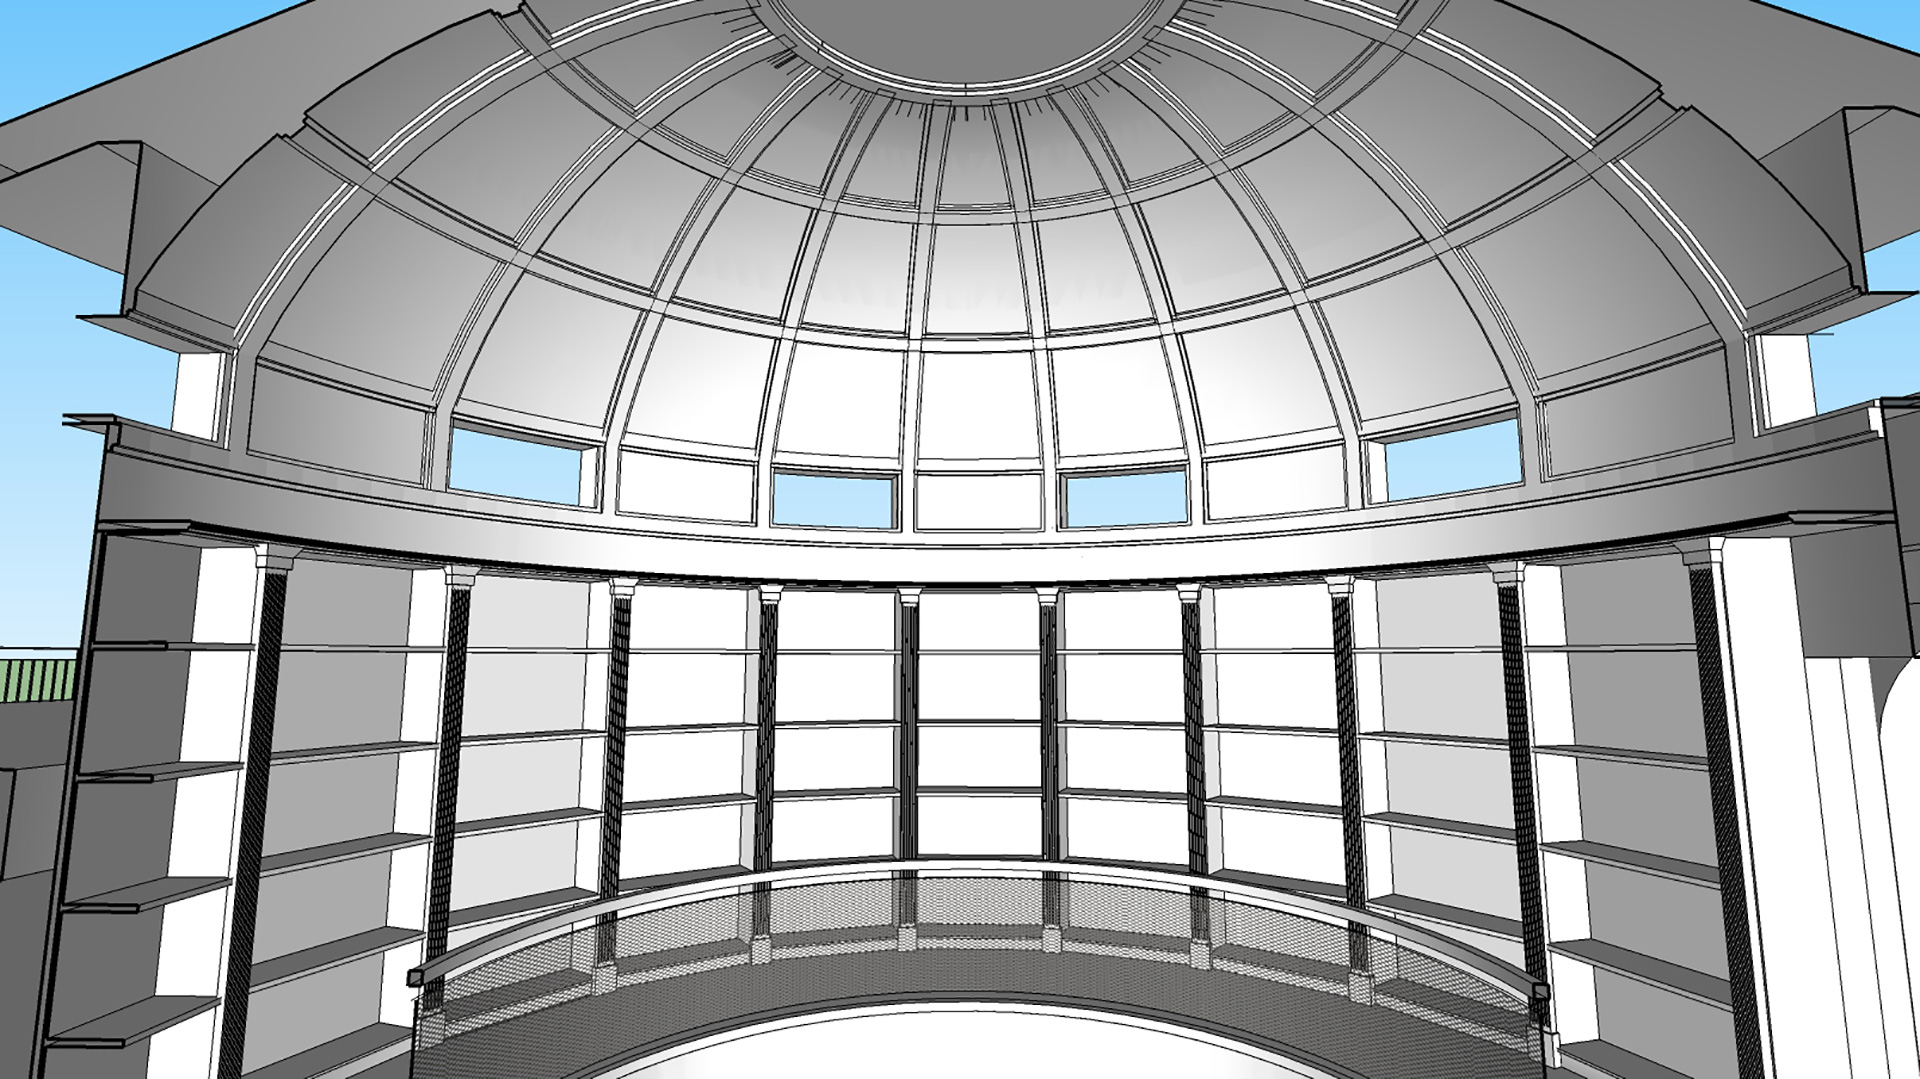 Rendering picture of domed atrium with intersparsed windows and bookshelves.